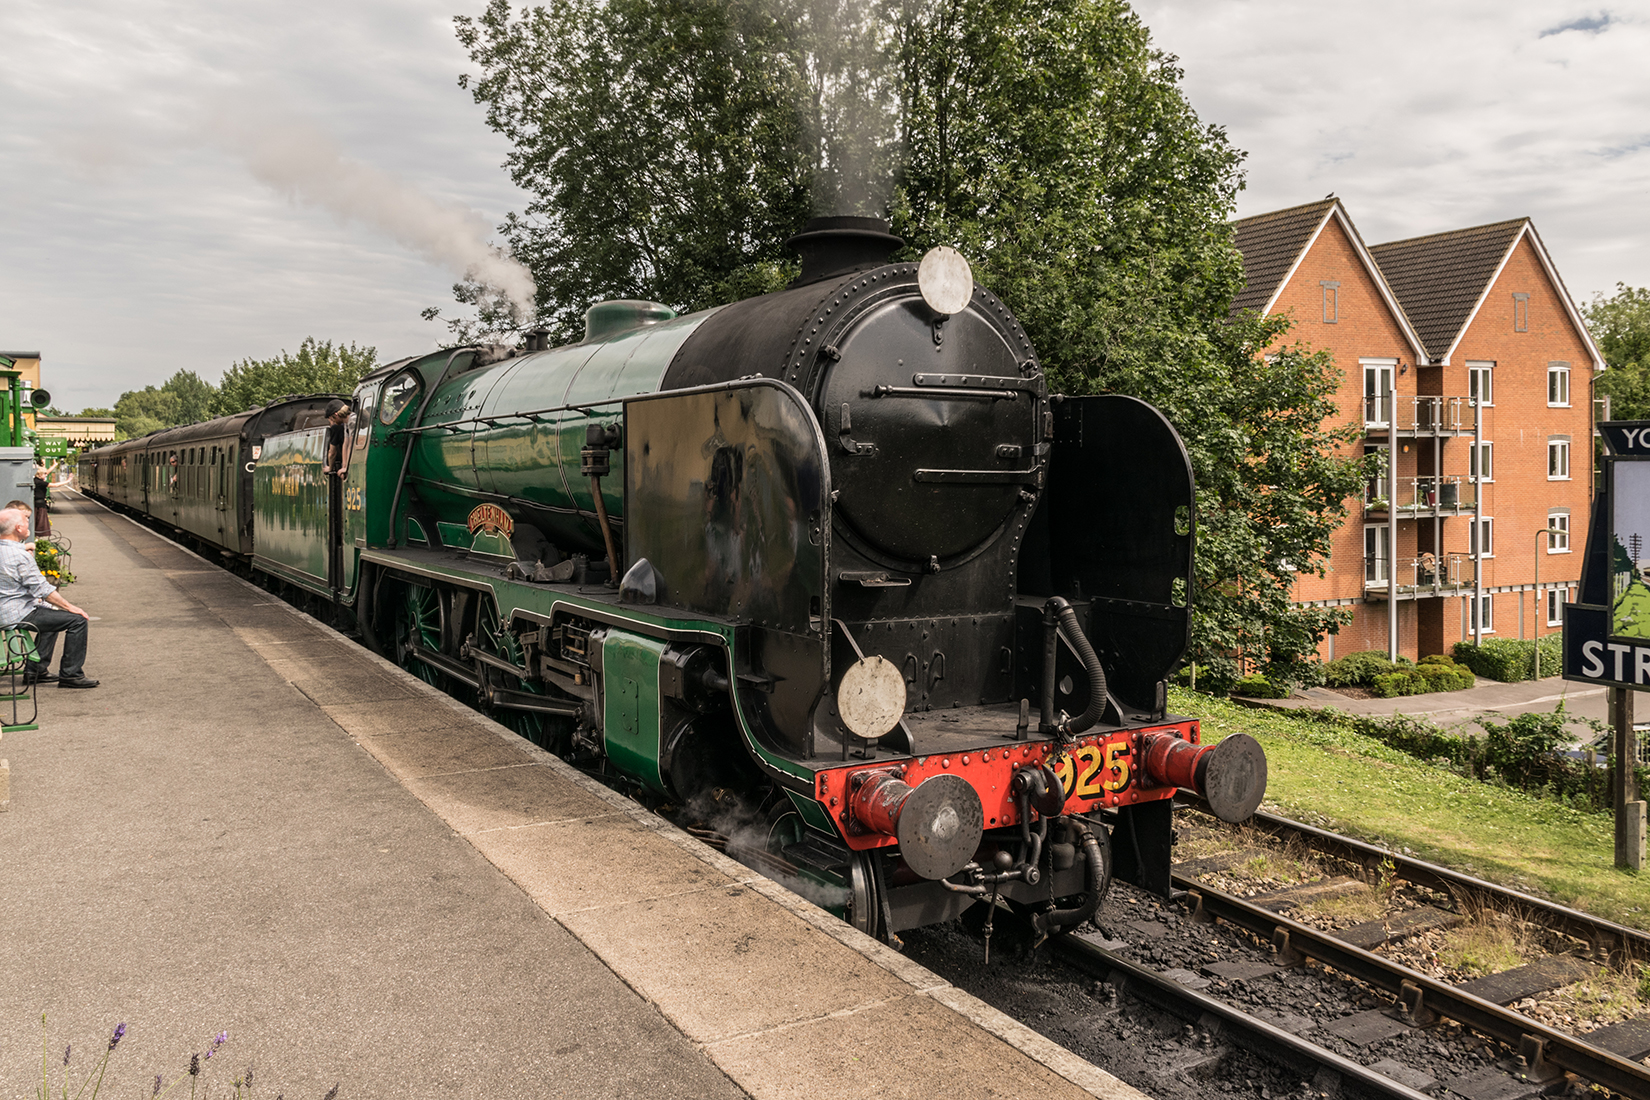 850 'Lord Nelson' leaves Alton with the 12:50 'down' service to Alresford